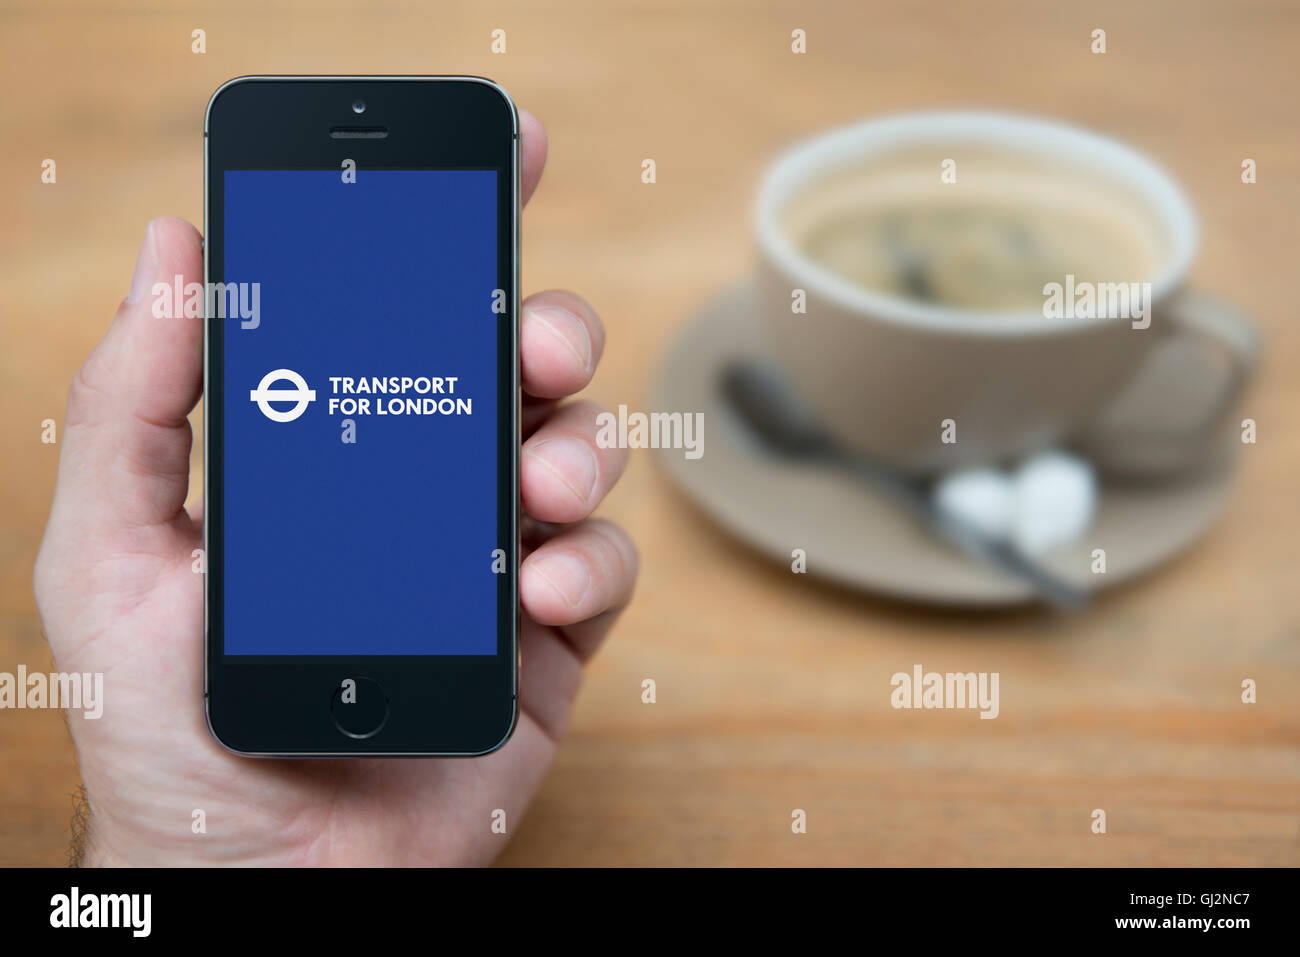 A man looks at his iPhone which displays the Transport for London logo, while sat with a cup of coffee (Editorial use only). Stock Photo